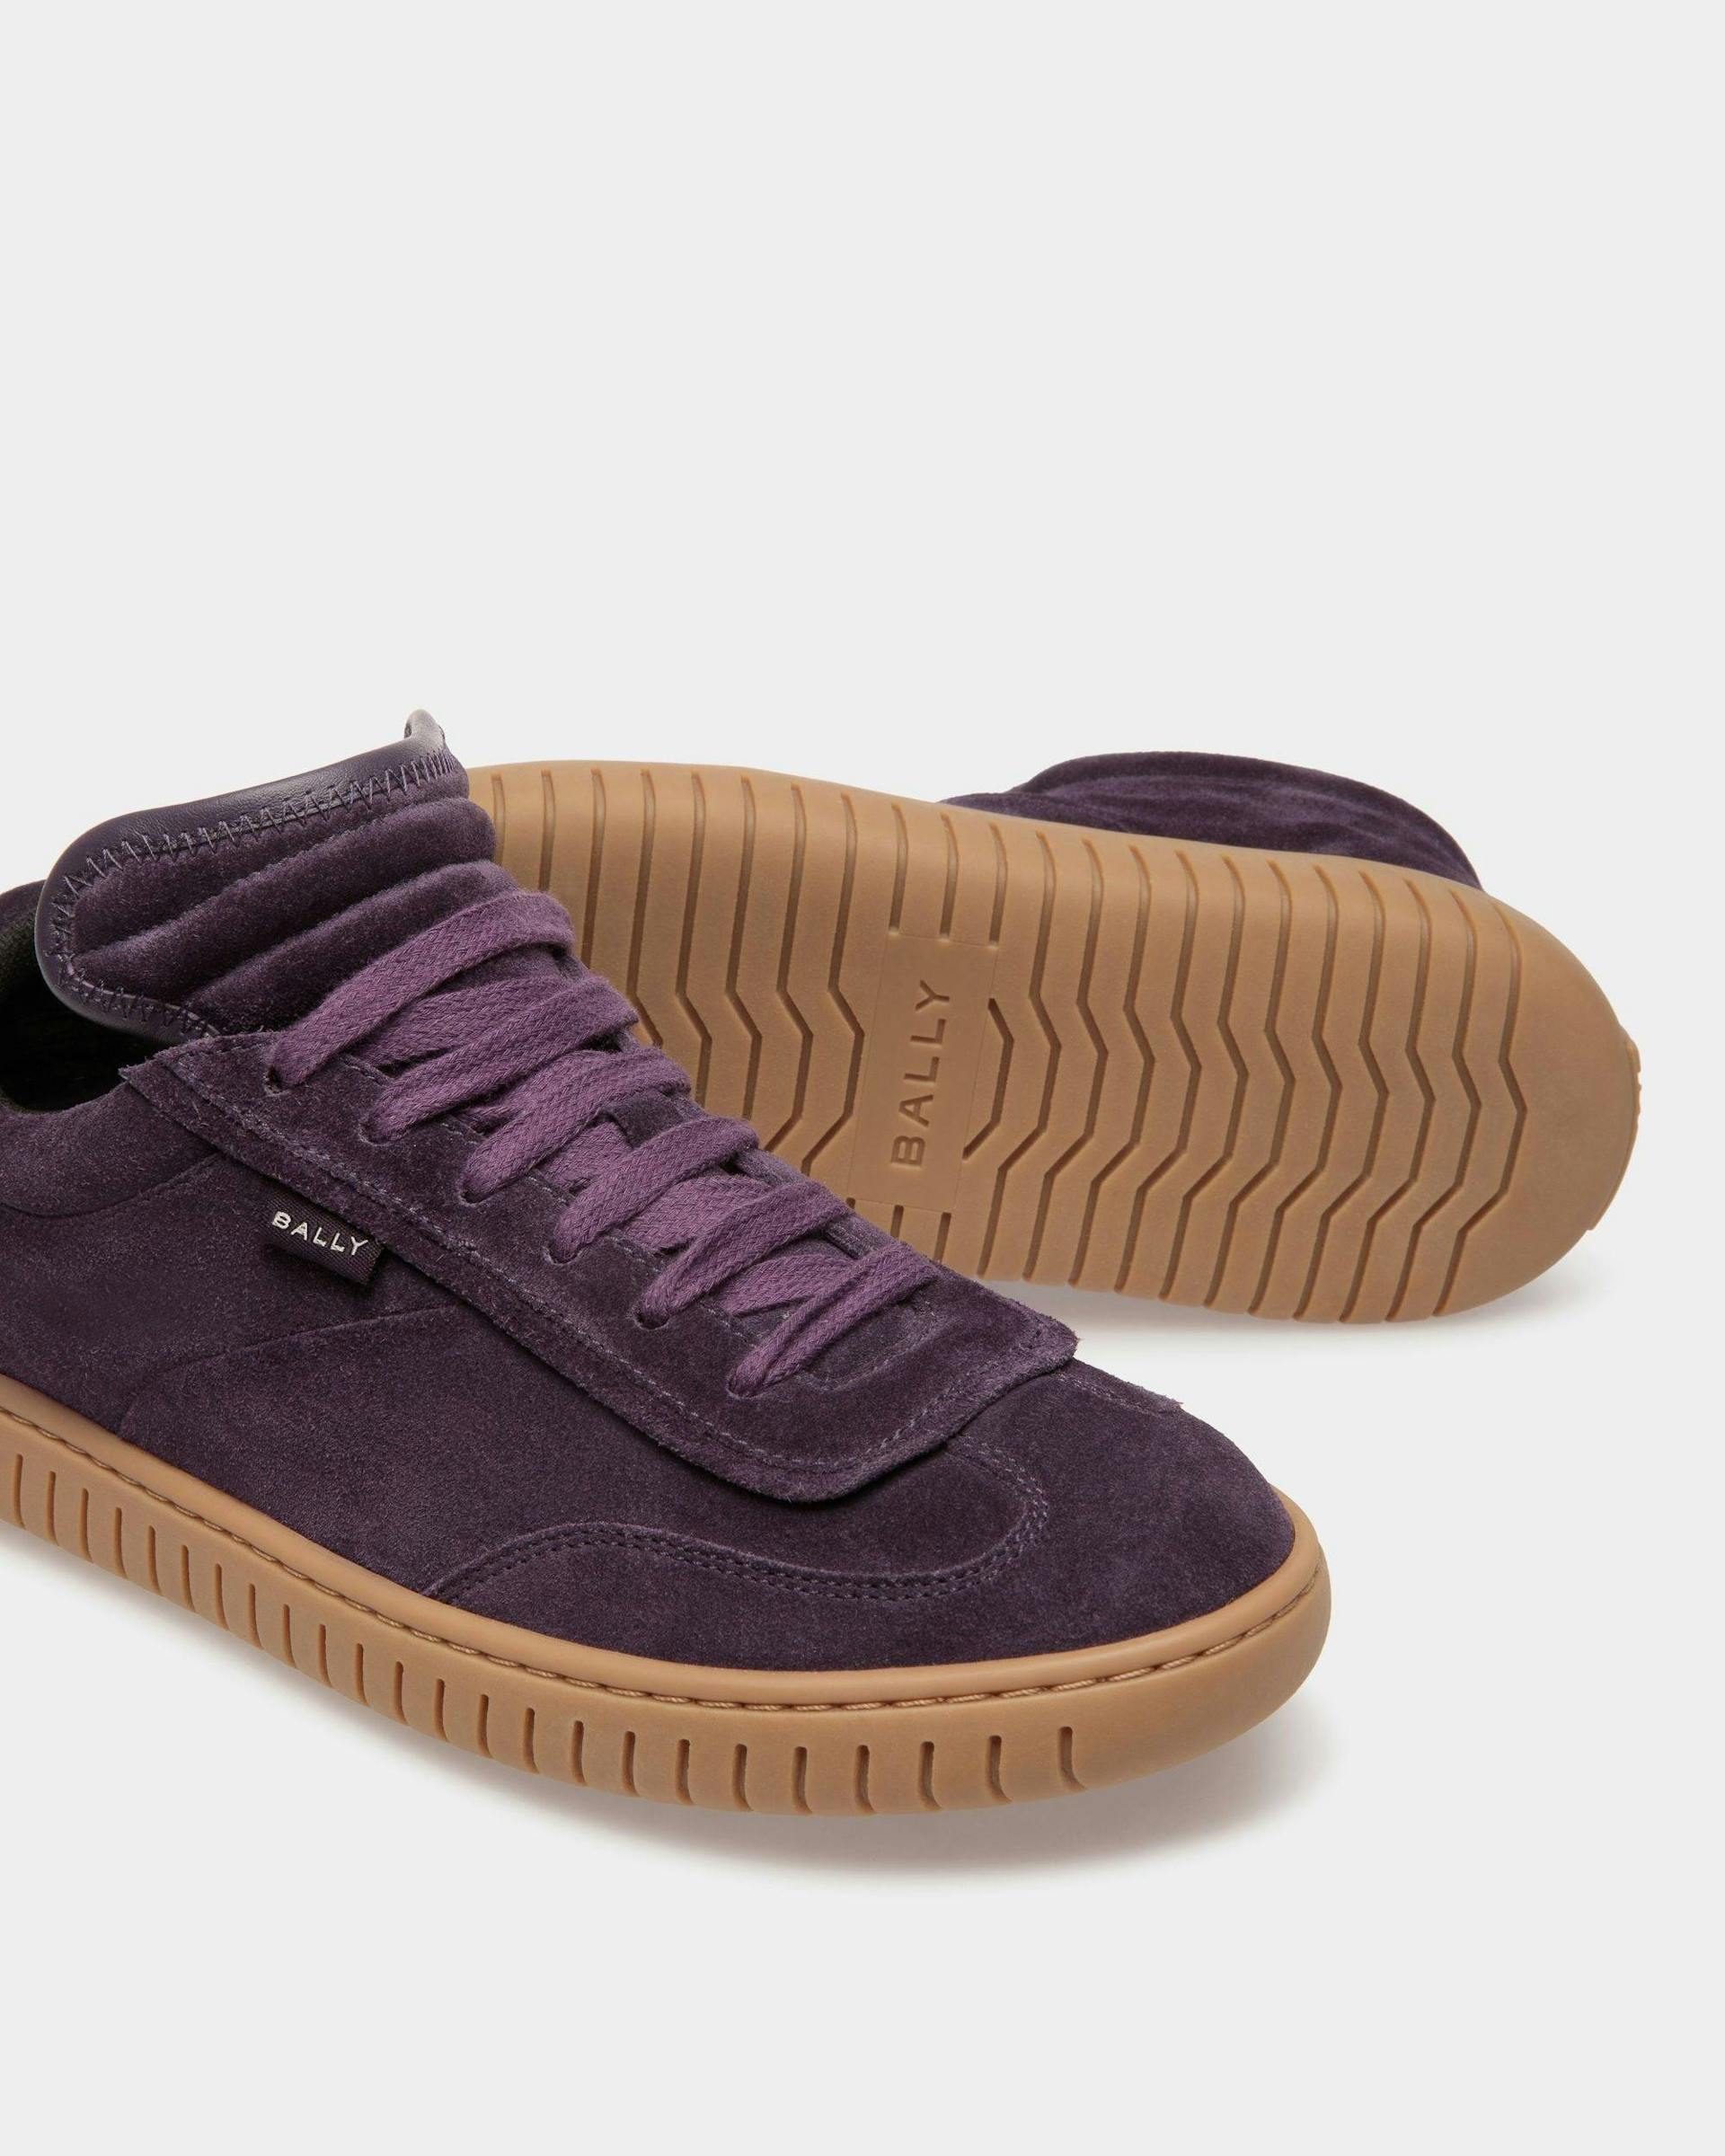 Player Sneakers In Orchid And Amber Leather - Women's - Bally - 04